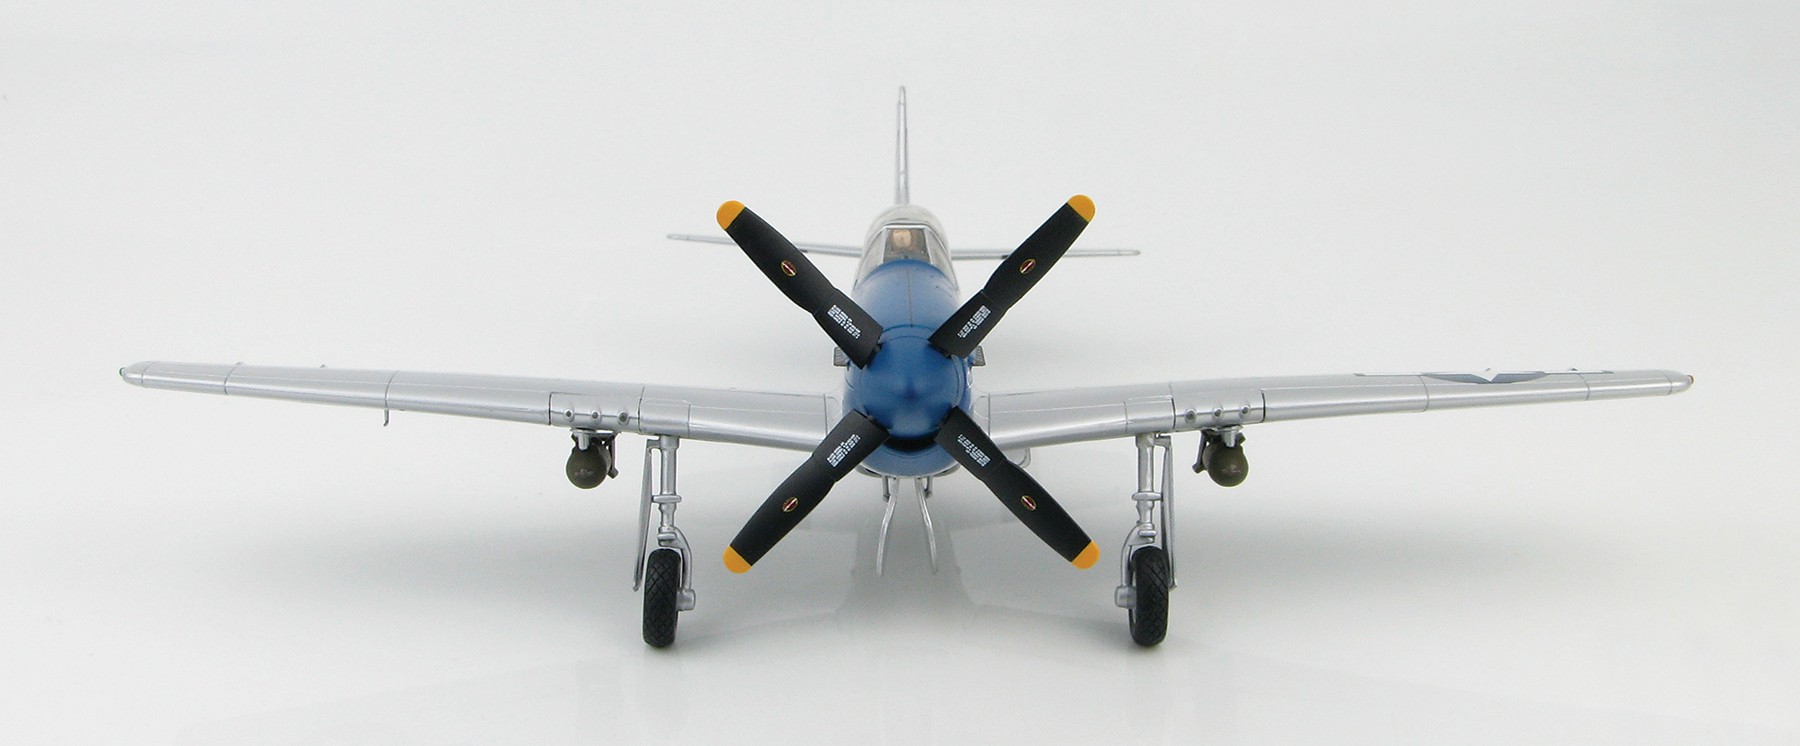 Hobby Master, Air Power Series, Capt. - P-51D Collectibles McSwine” 1944, Diecast HA7726 Models “Moonbeam W. HA7726 1:48 Whisner Item: Mustang ezToys Scale and